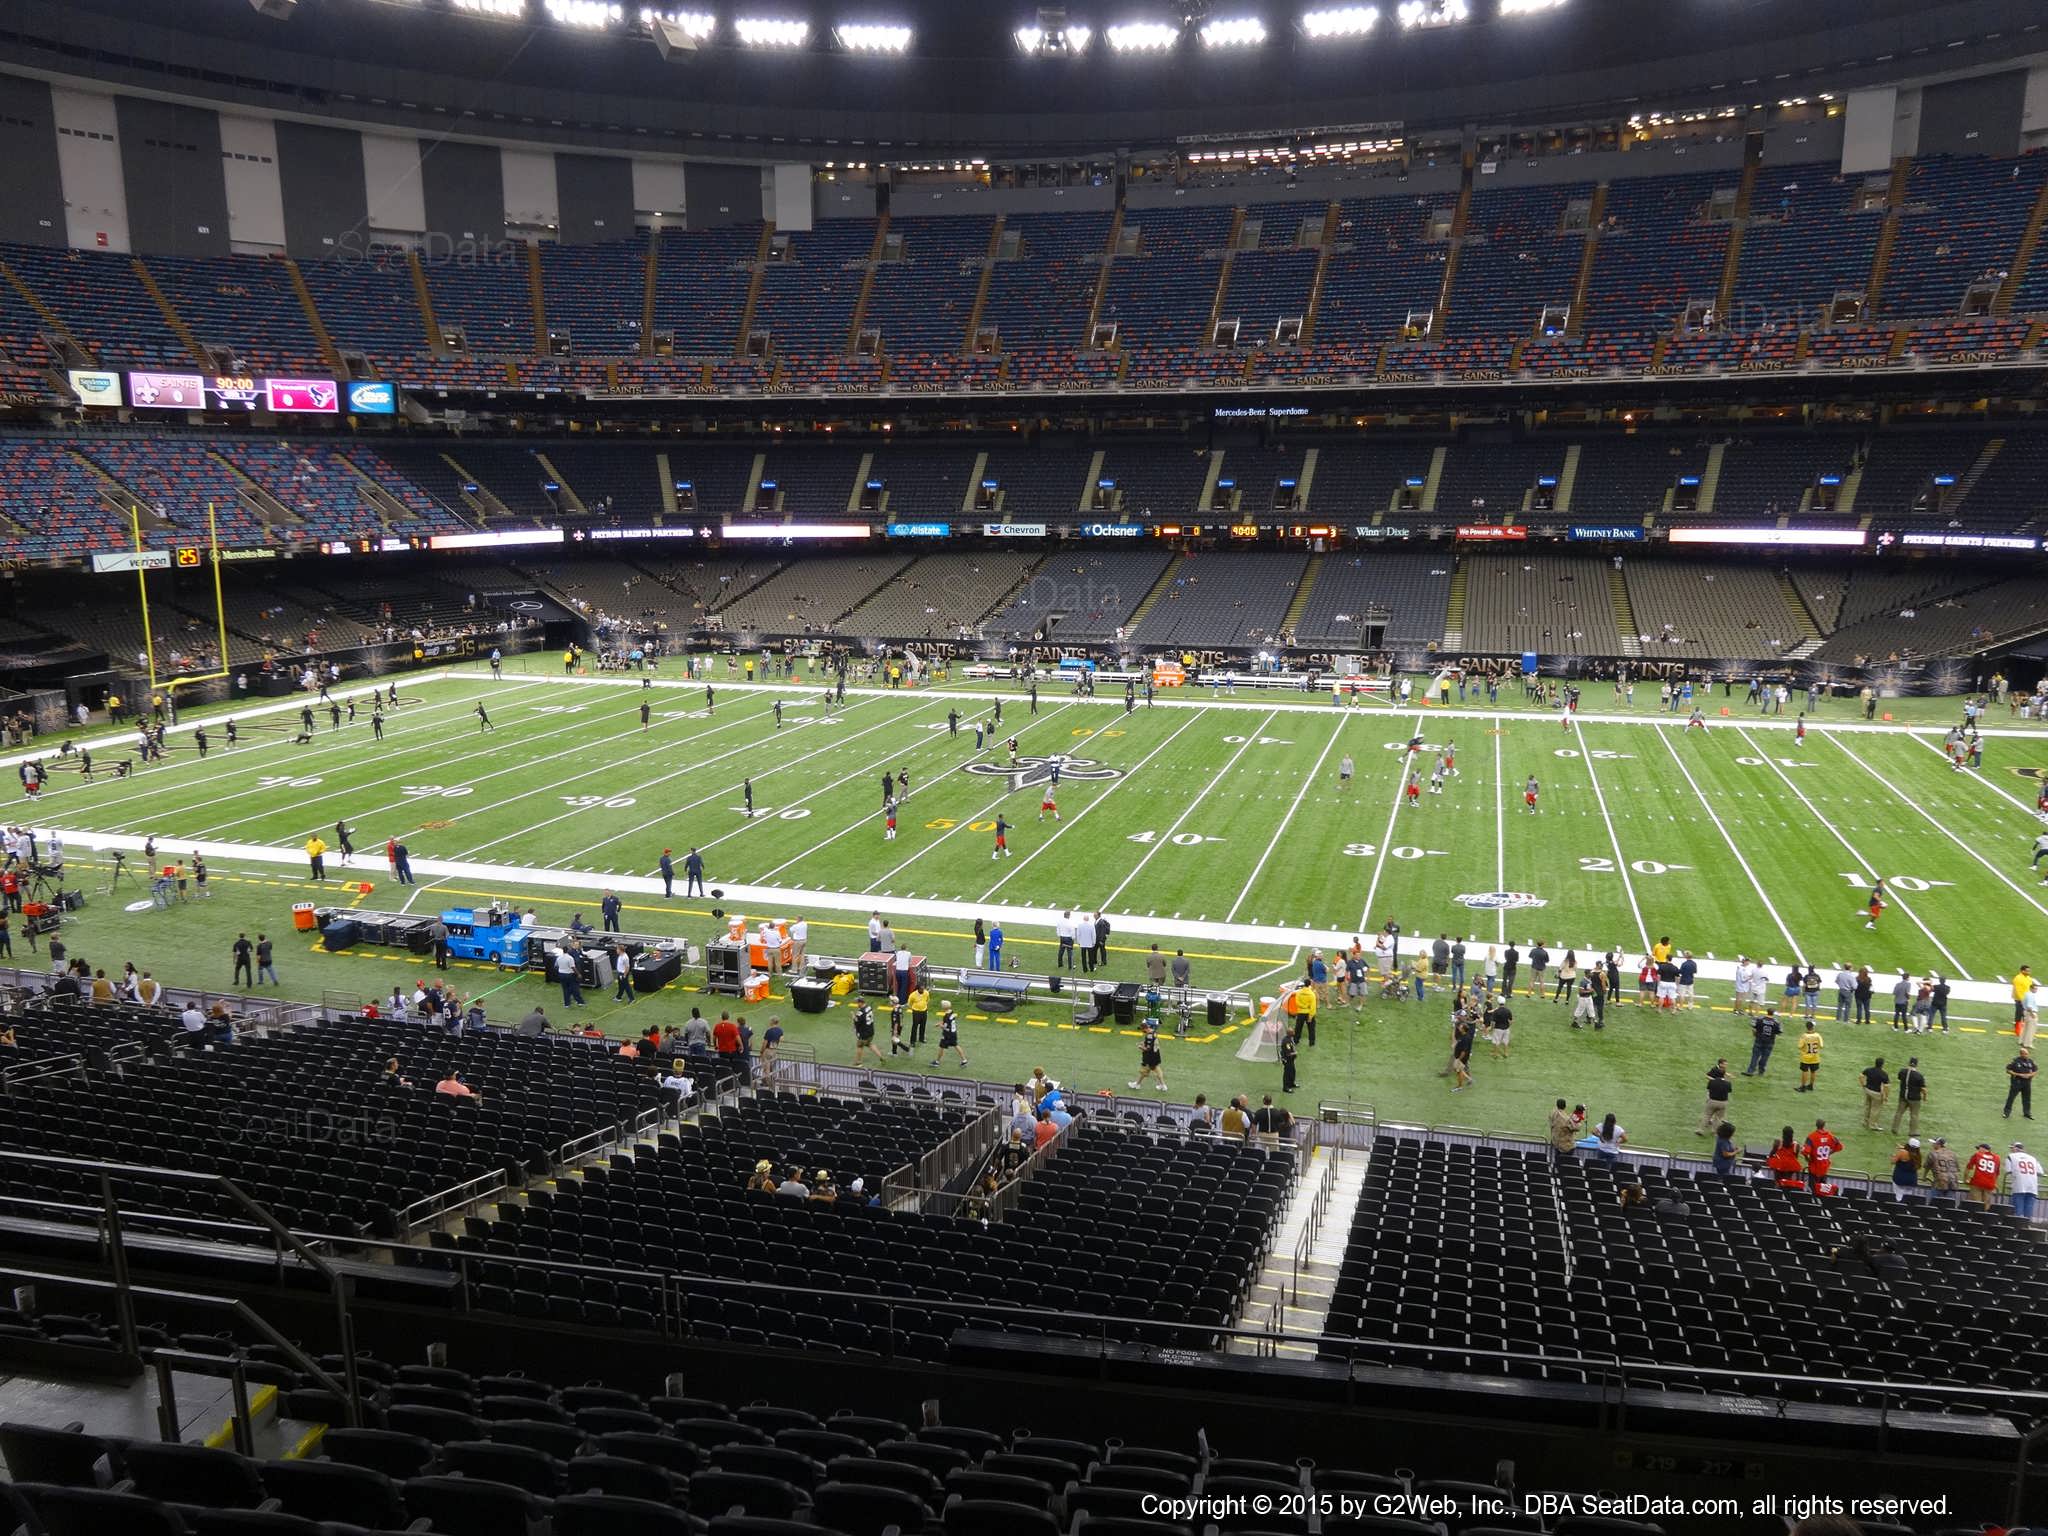 Seat view from section 310 at the Mercedes-Benz Superdome, home of the New Orleans Saints